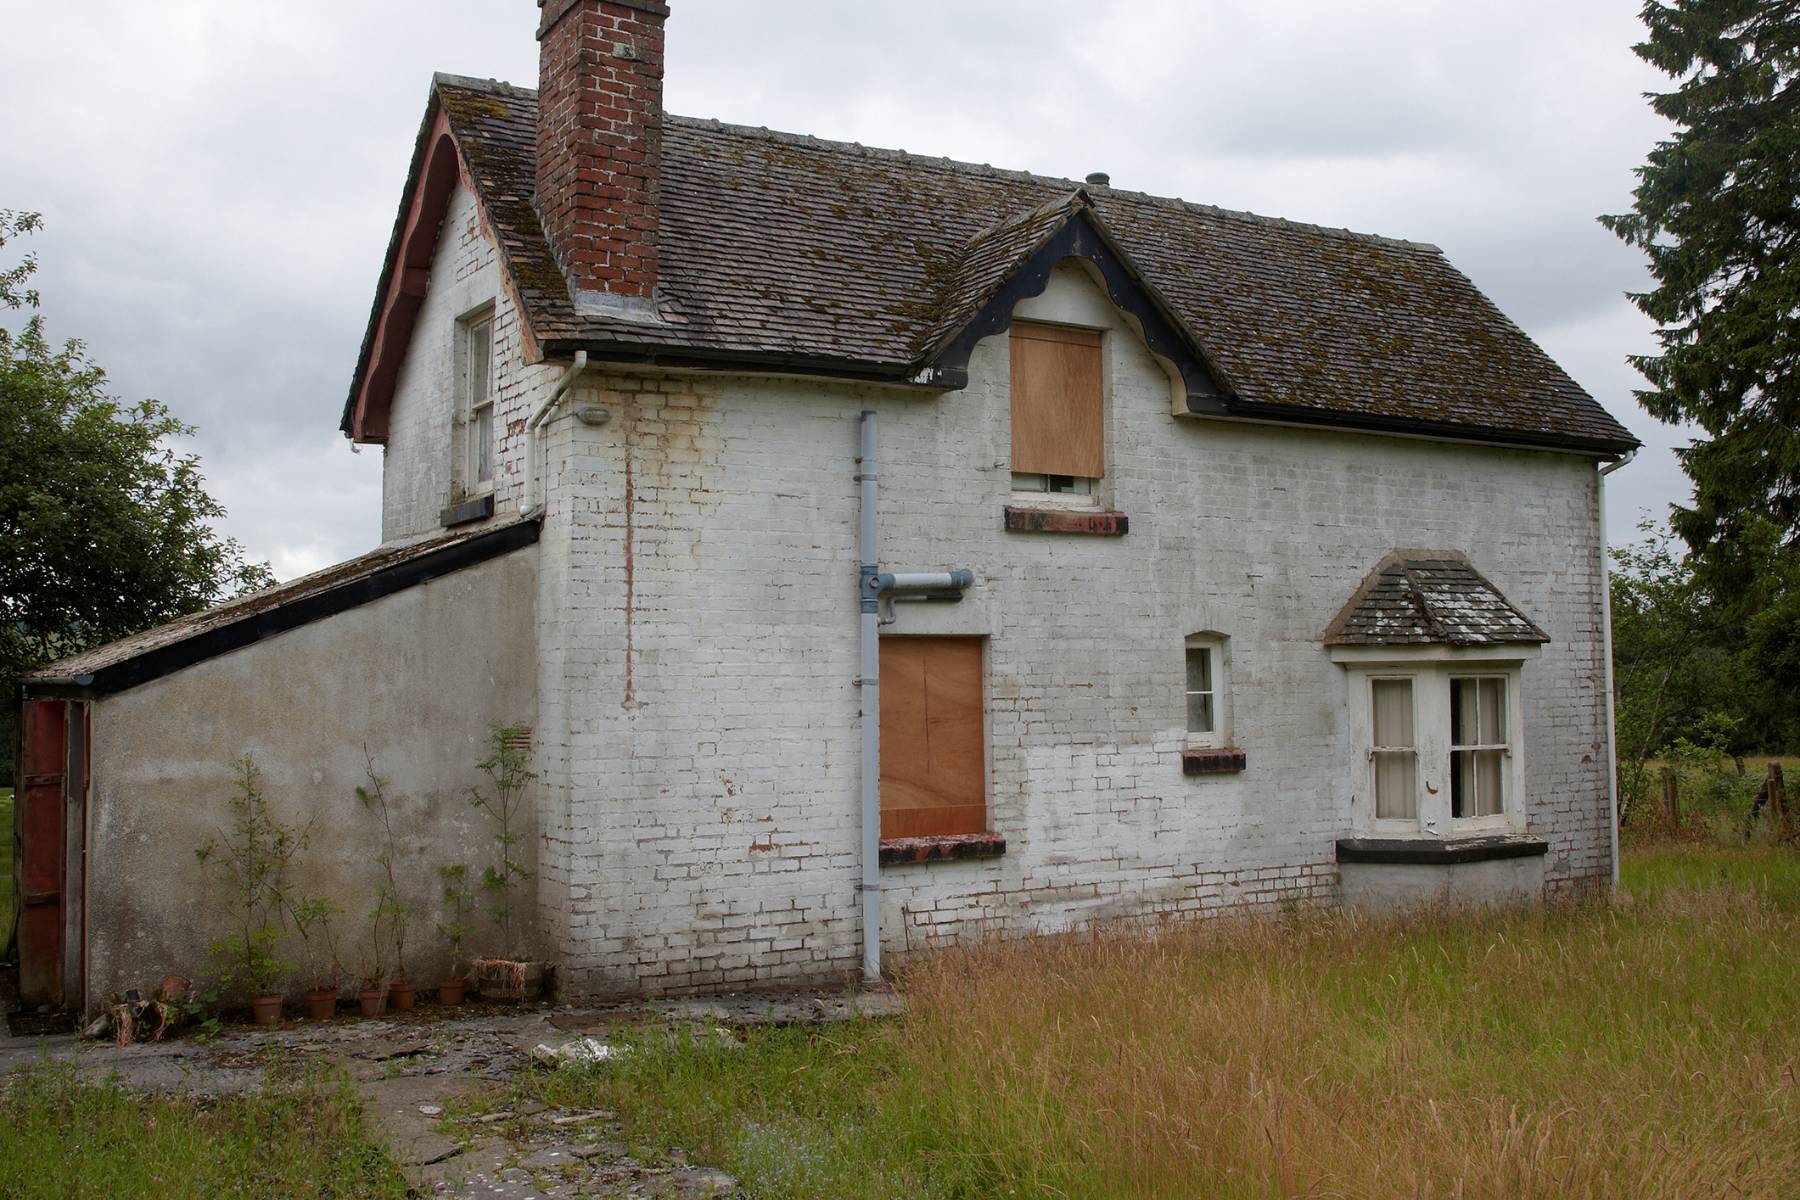 A large house with boarded up windows